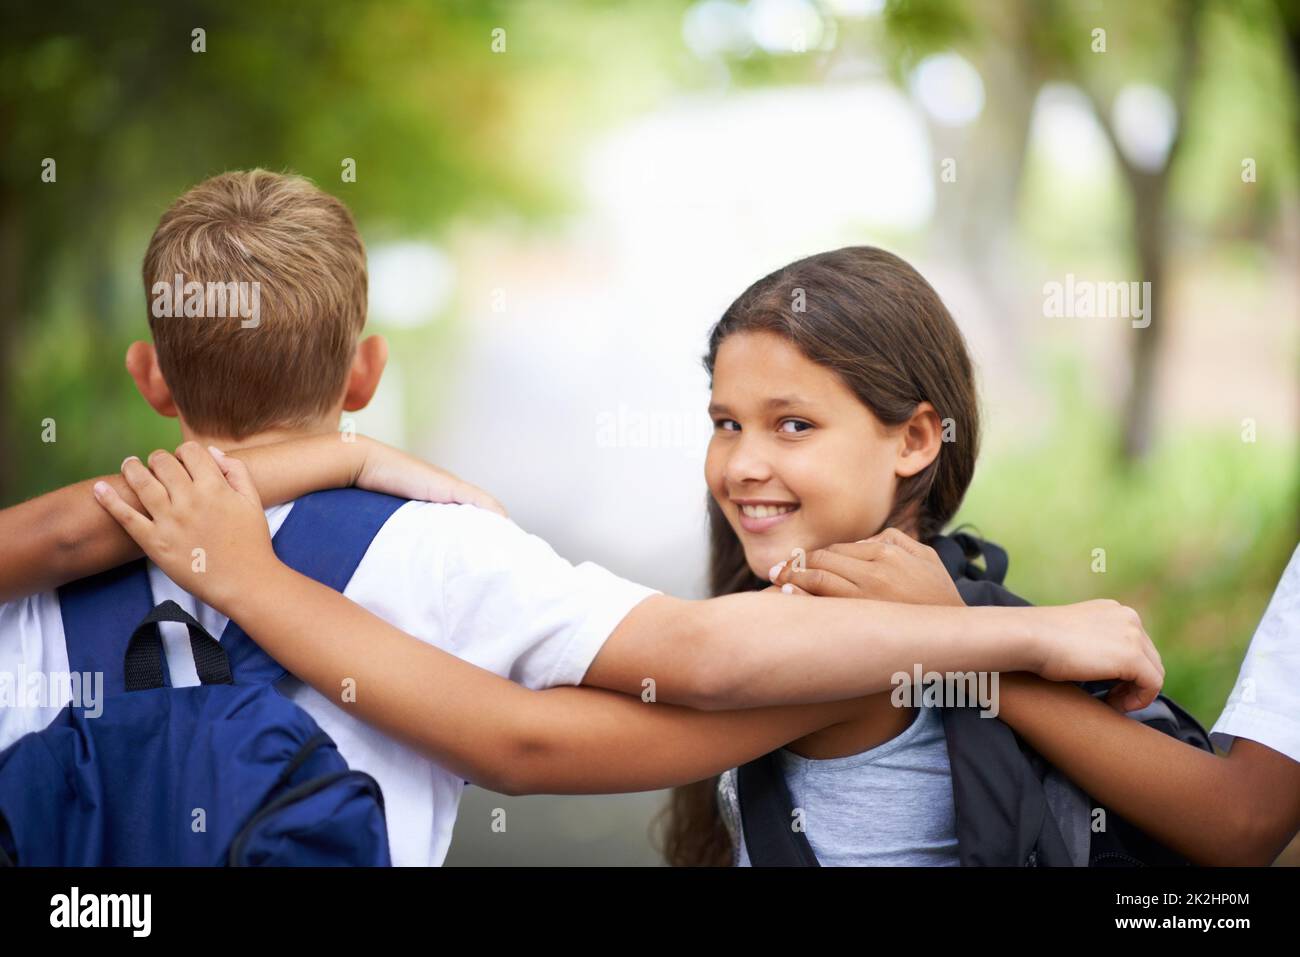 They love school. Cropped shot of elementary school kids. Stock Photo